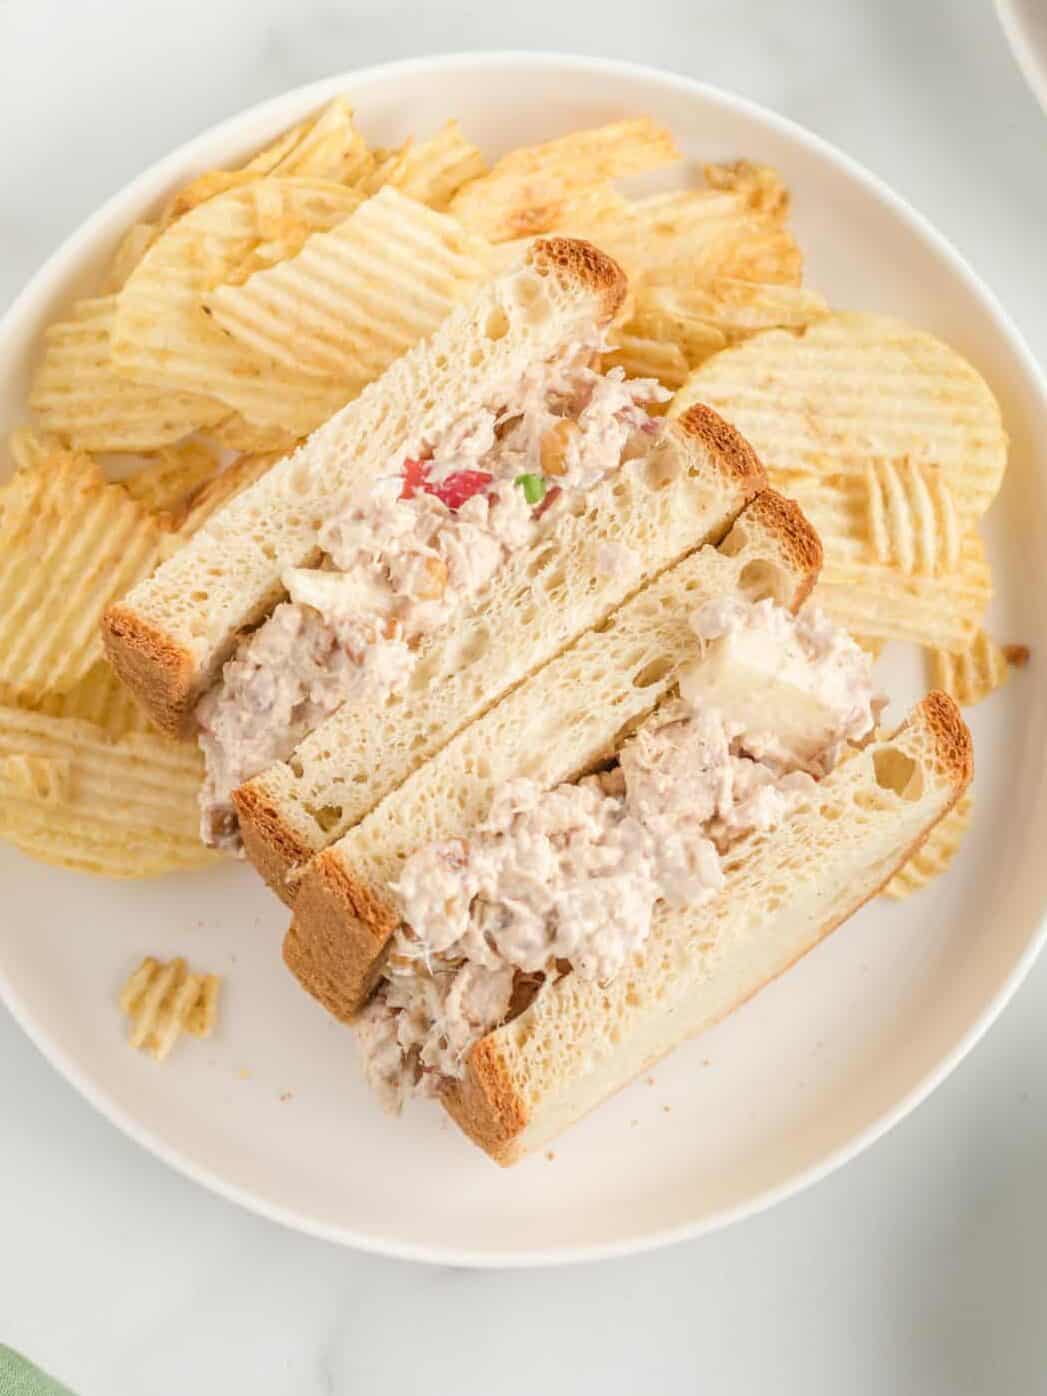 overhead view of a tuna salad sandwich with the halves pointing up to show the filling on a white plate with potato chips.